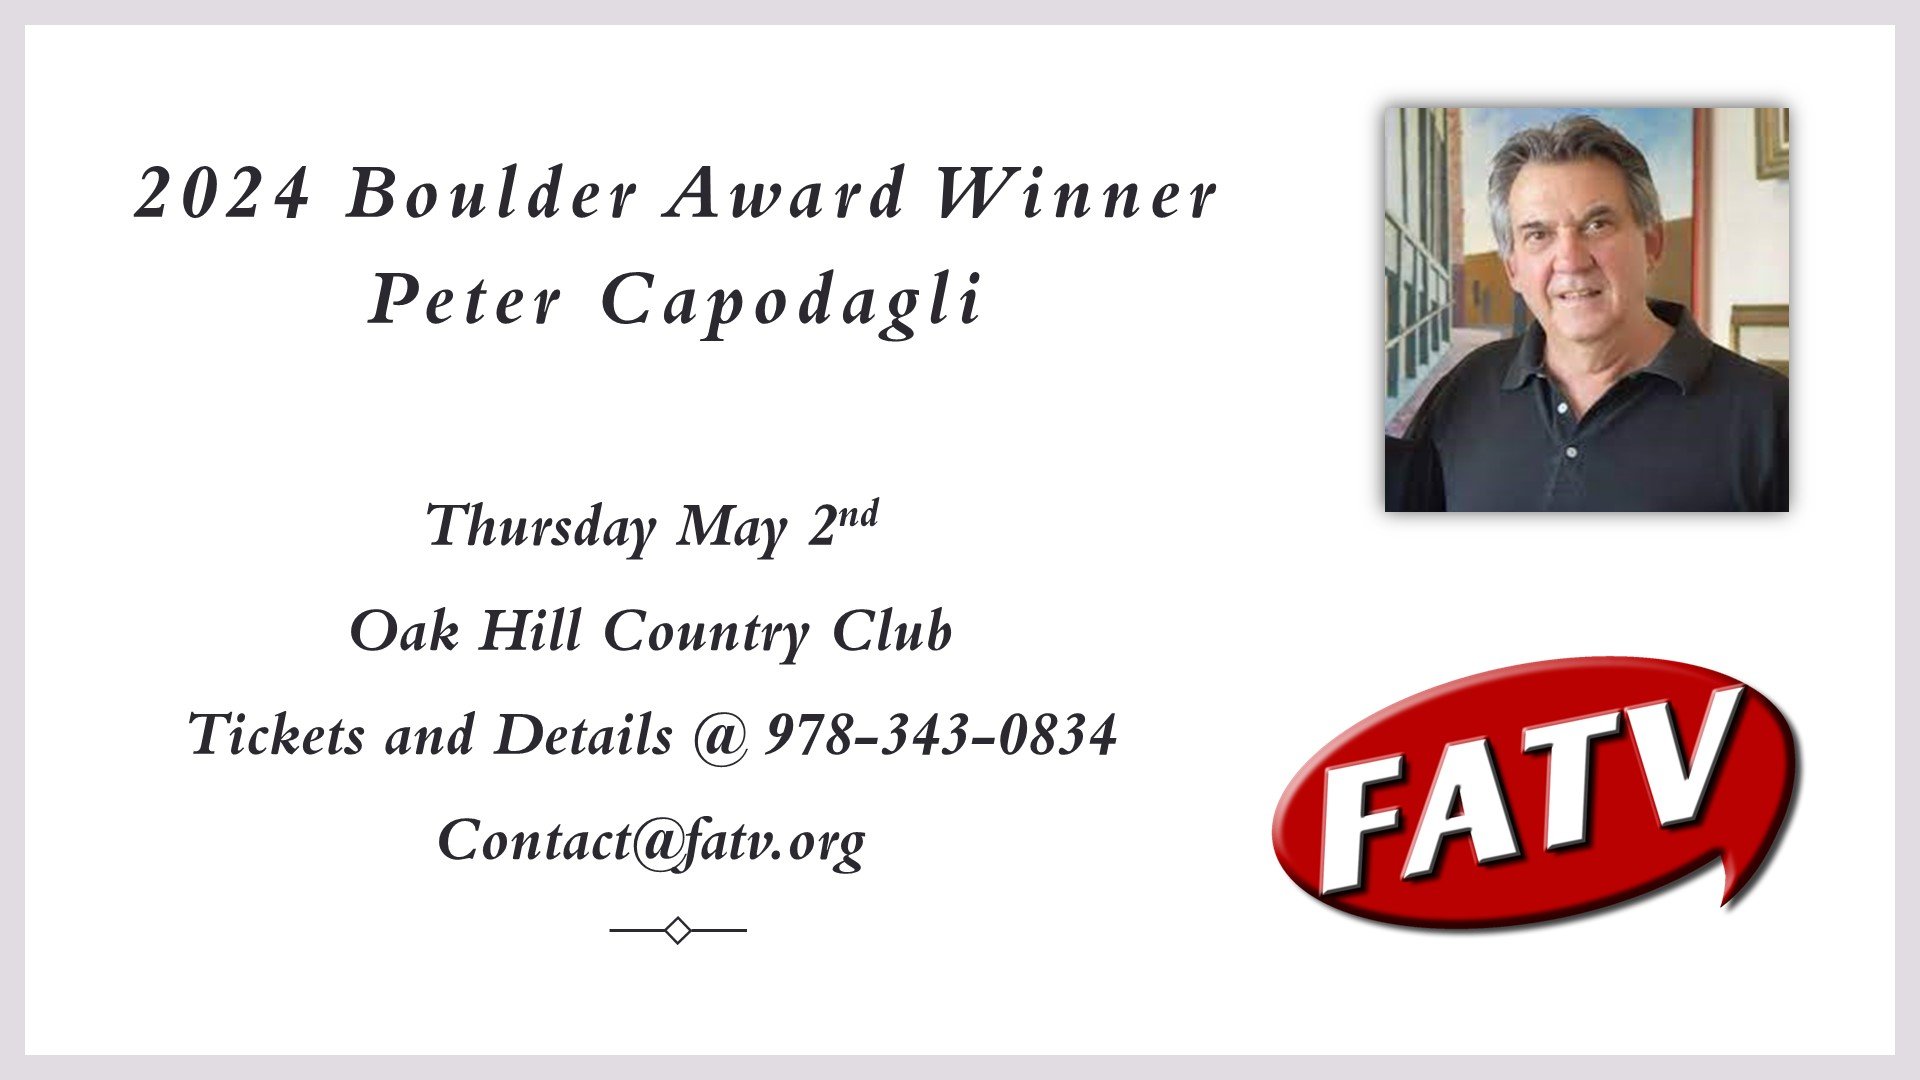 Congratulations to this year&rsquo;s Boulder Award winner Peter Capodagli. 
&amp; Member Award winners David Su&aacute;rez, Christopher Landry, and Kevin Cormier 
Tickets available until Friday April 26th at FATV 978-343-0834
@petePeter Capodagli Dav